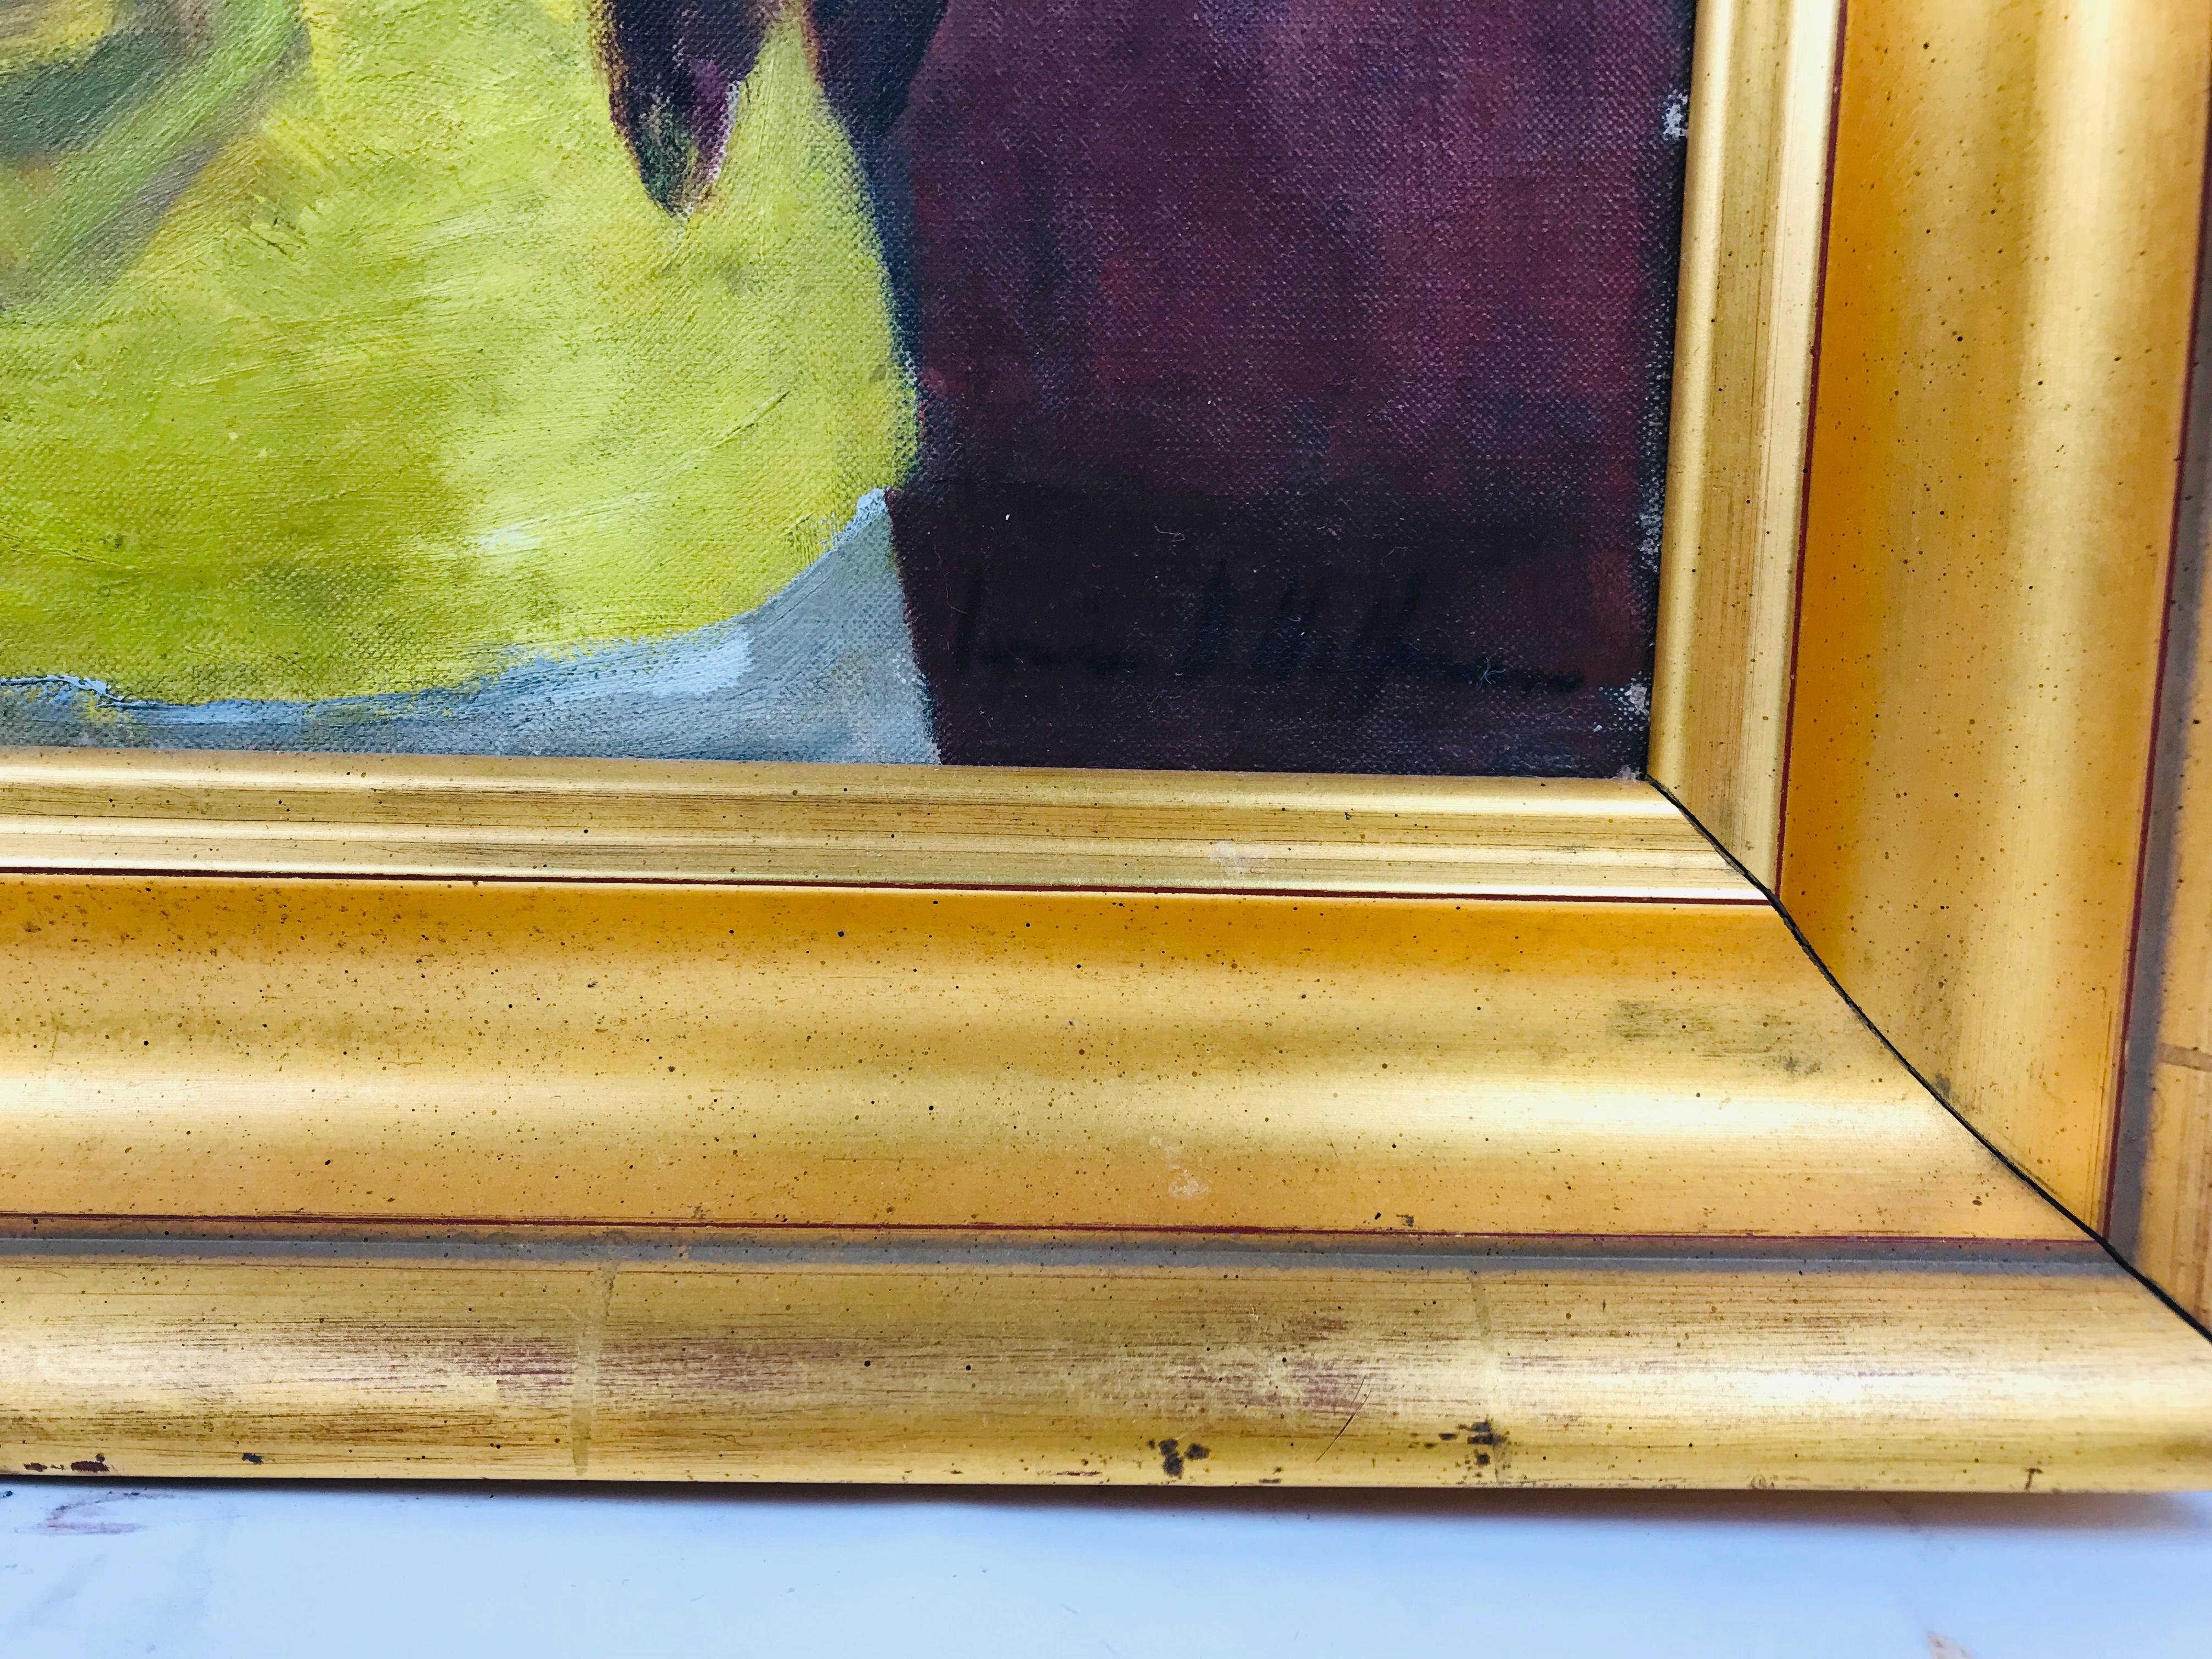 A lovely oil on canvas by listed artist Irwin D. Hoffman (1901-1989) depicting a prominently dressed women adorned in a bright yellow sleeveless blouse. She is both strong and soft. With the brightly colored focal points and polished golden frame